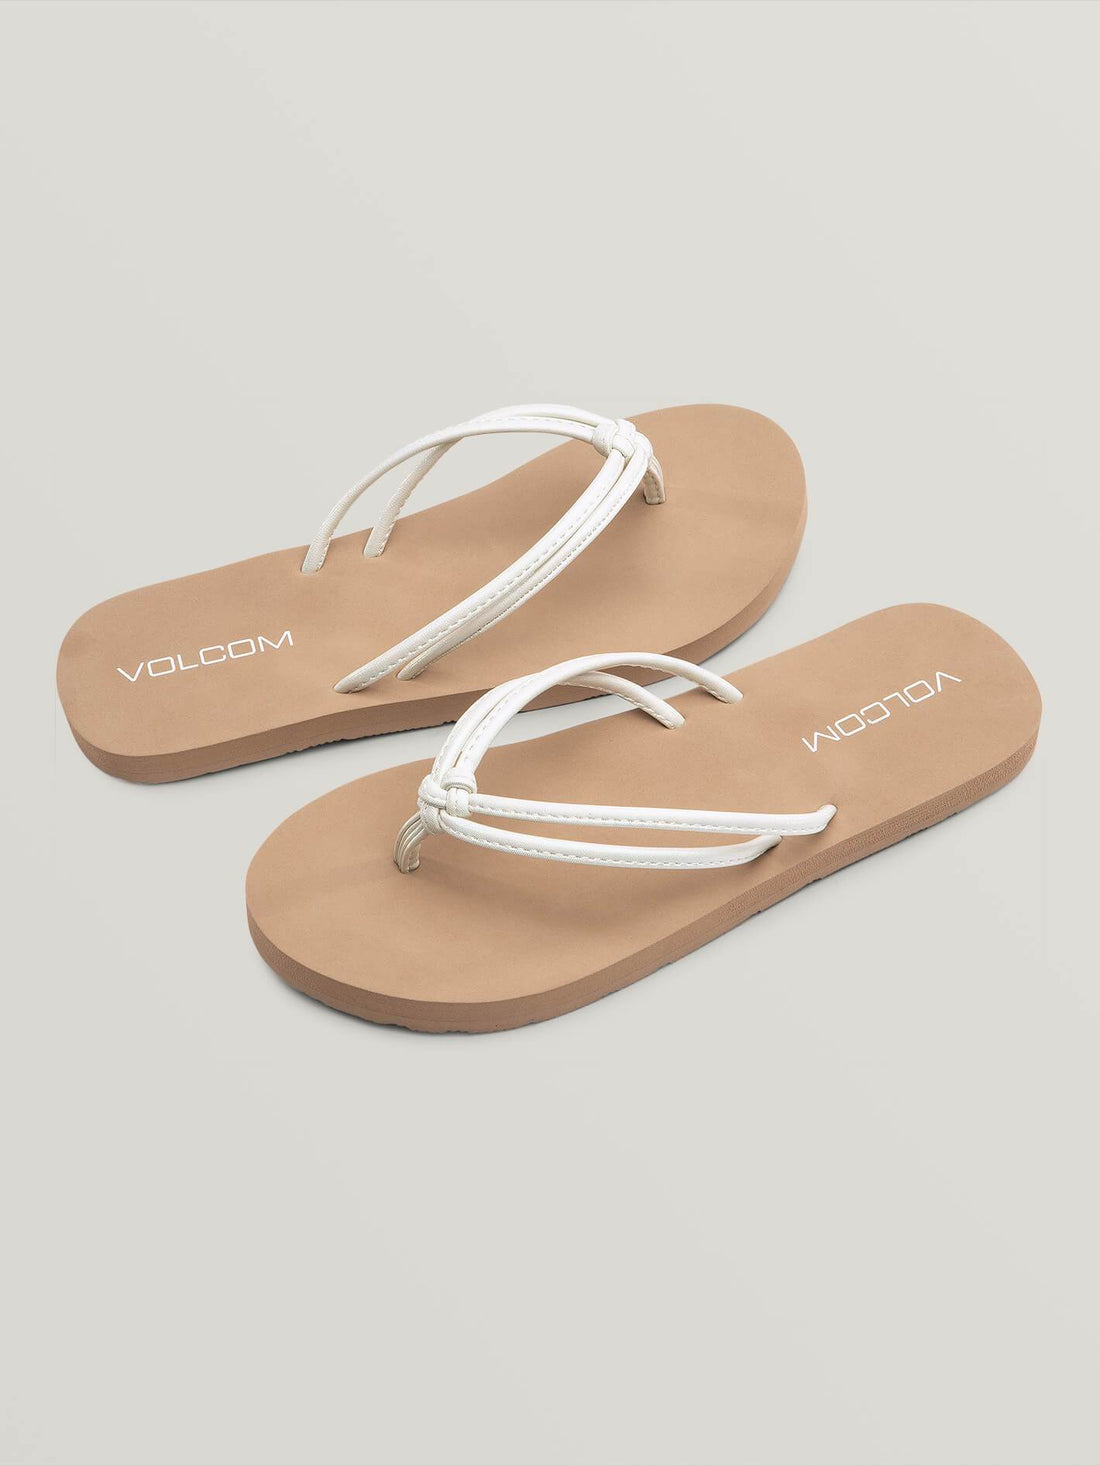 GIRLS FOREVER AND EVER SANDALS - GLOW